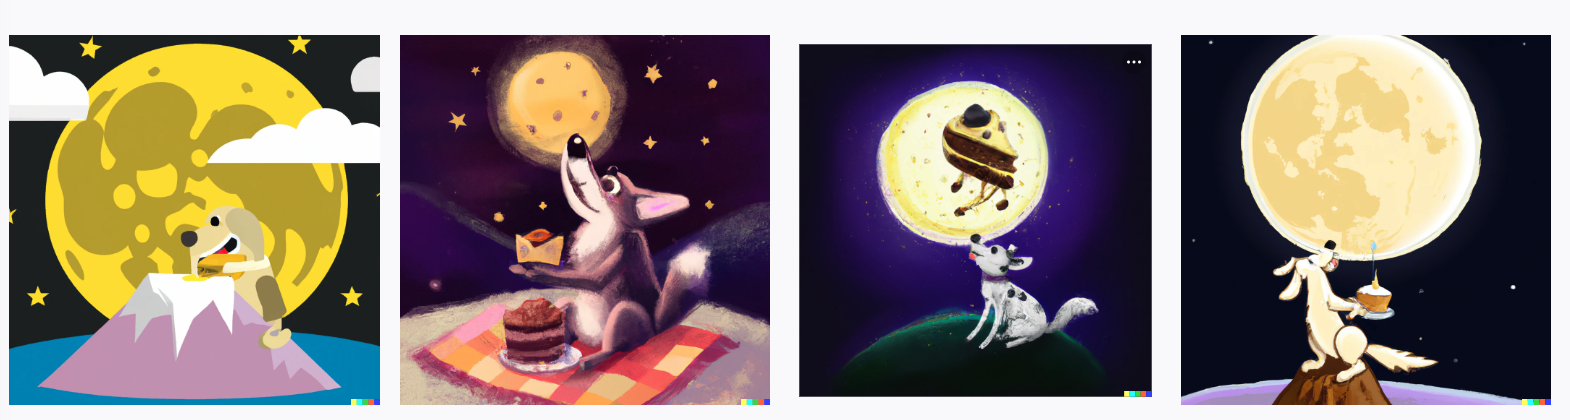 Picture 2 - Images generated by the prompt “a dog eating cake on the moon” - the first one has a dog on a crater eating cake with the moon in the background; the second one has the dog eating cake on a picnic blanket with the moon in the sky; the third one has a dog looking at the moon and a piece of cake floating by the moon; the fourth one has a dog on a crater with a piece of cake looking at the moon, which is in the sky